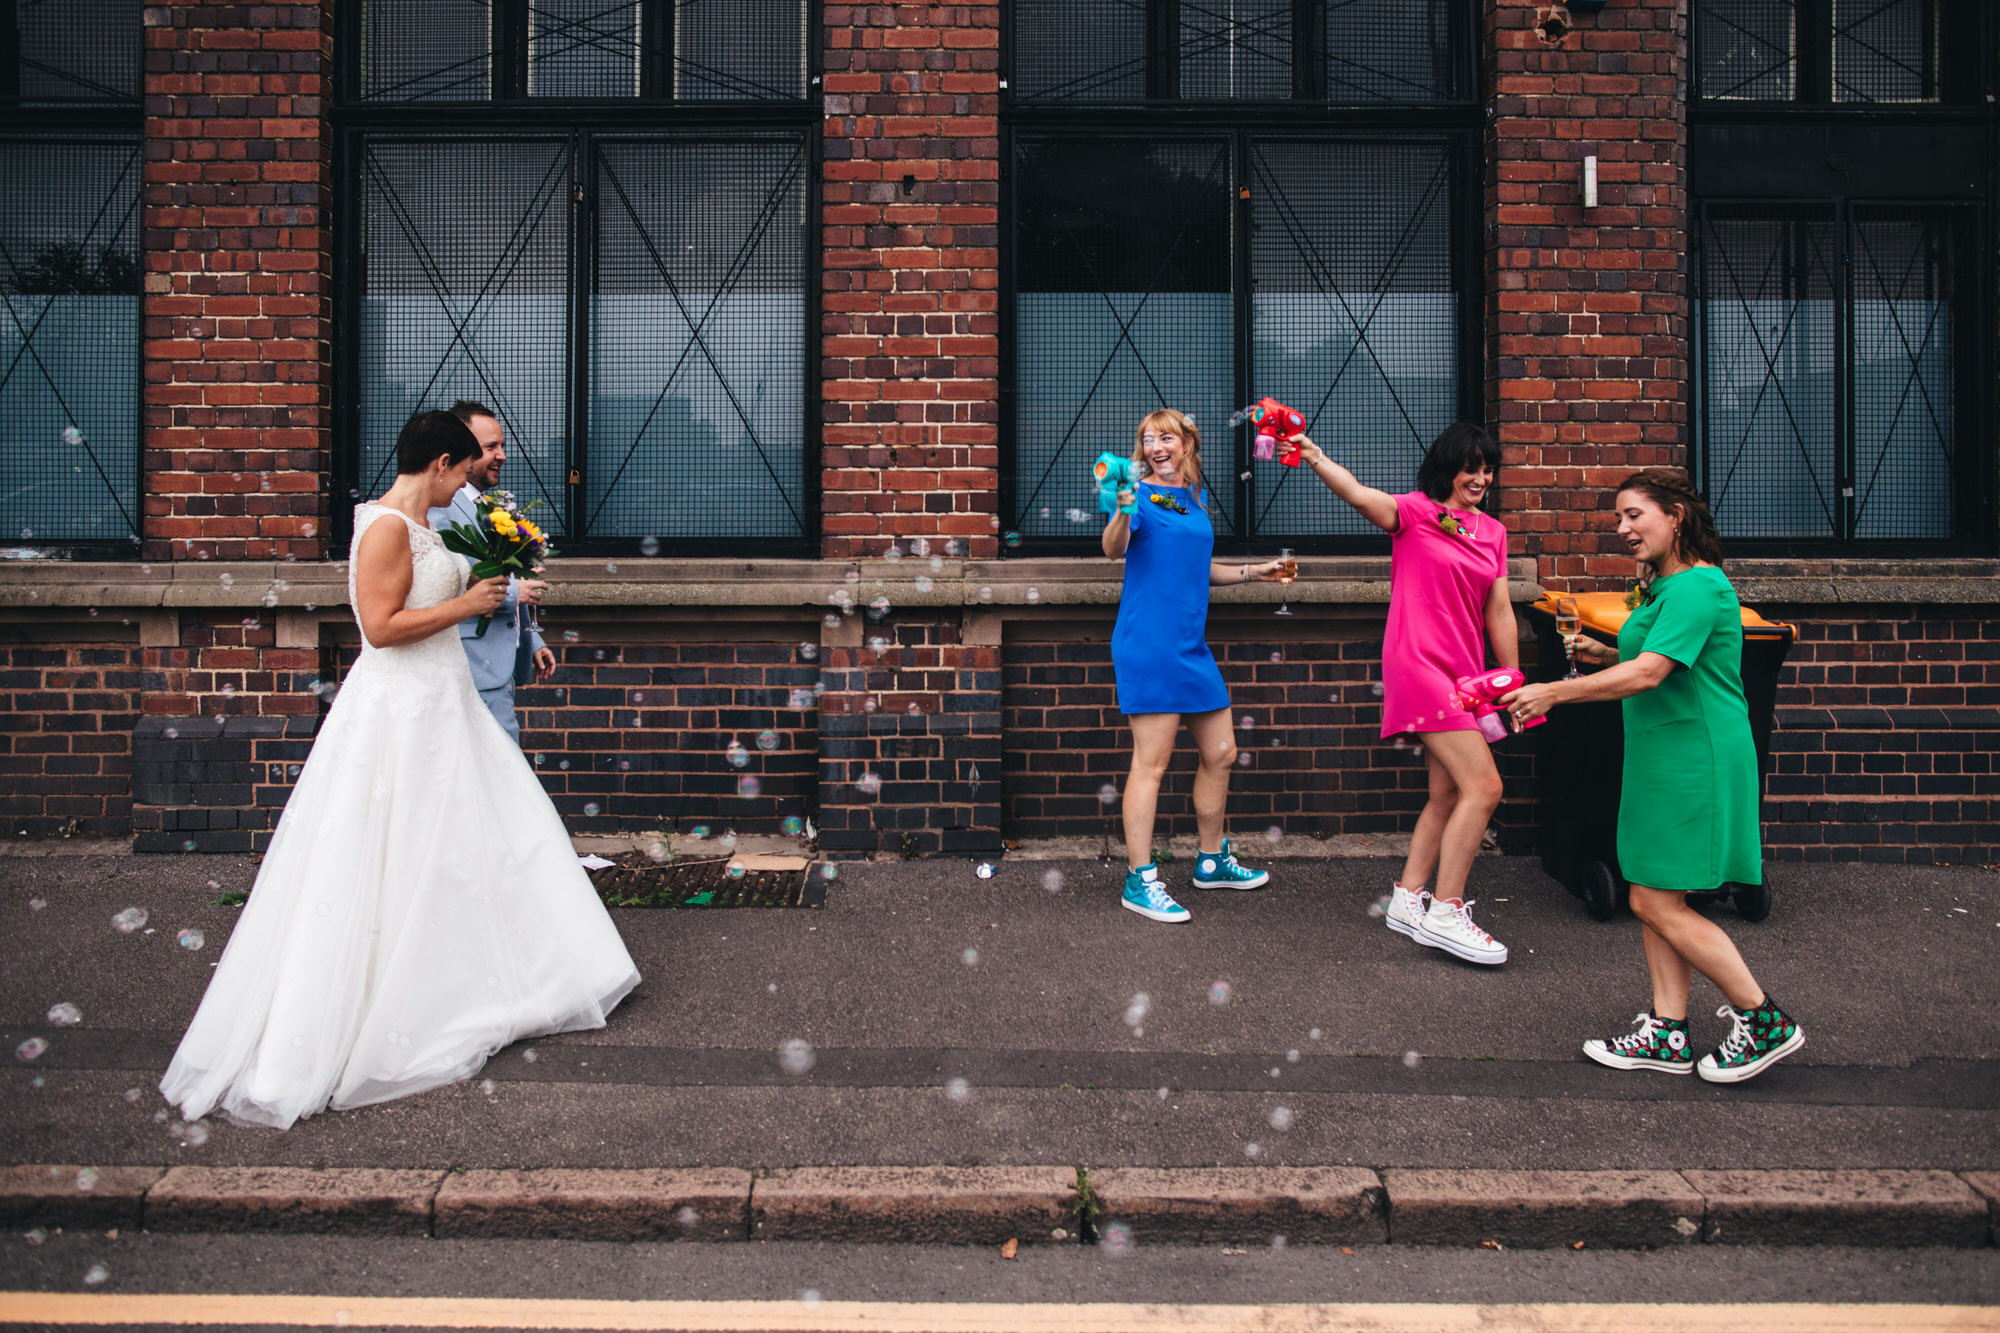 bridesmaids in colourful shift dresses shoot bubbles with bubble guns at bride and groom